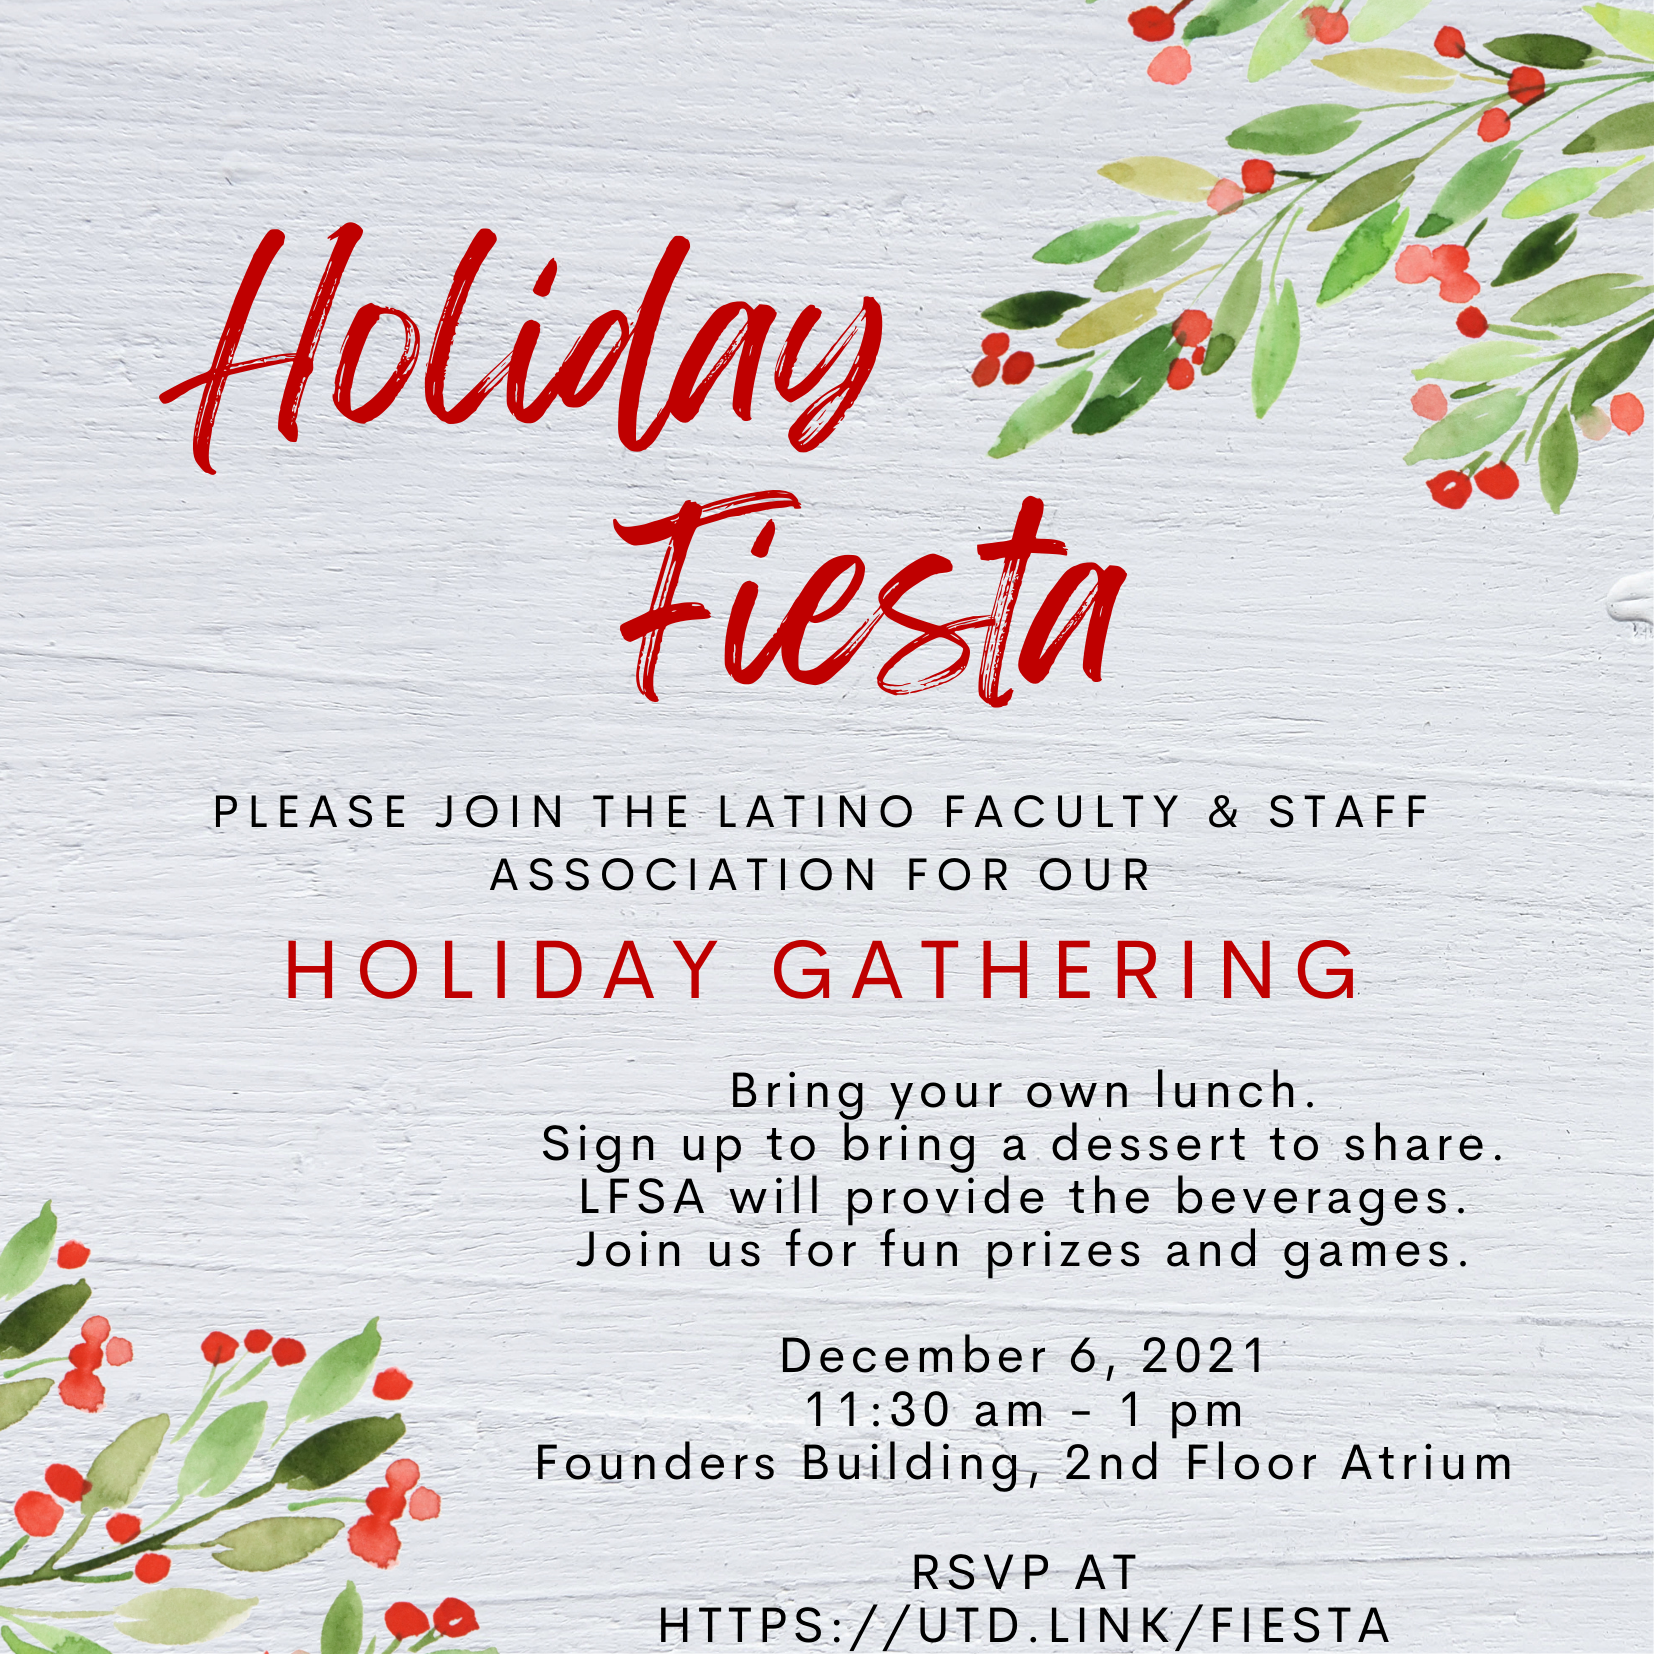 Invitation to holiday event on December 6 sponsored by LFSA